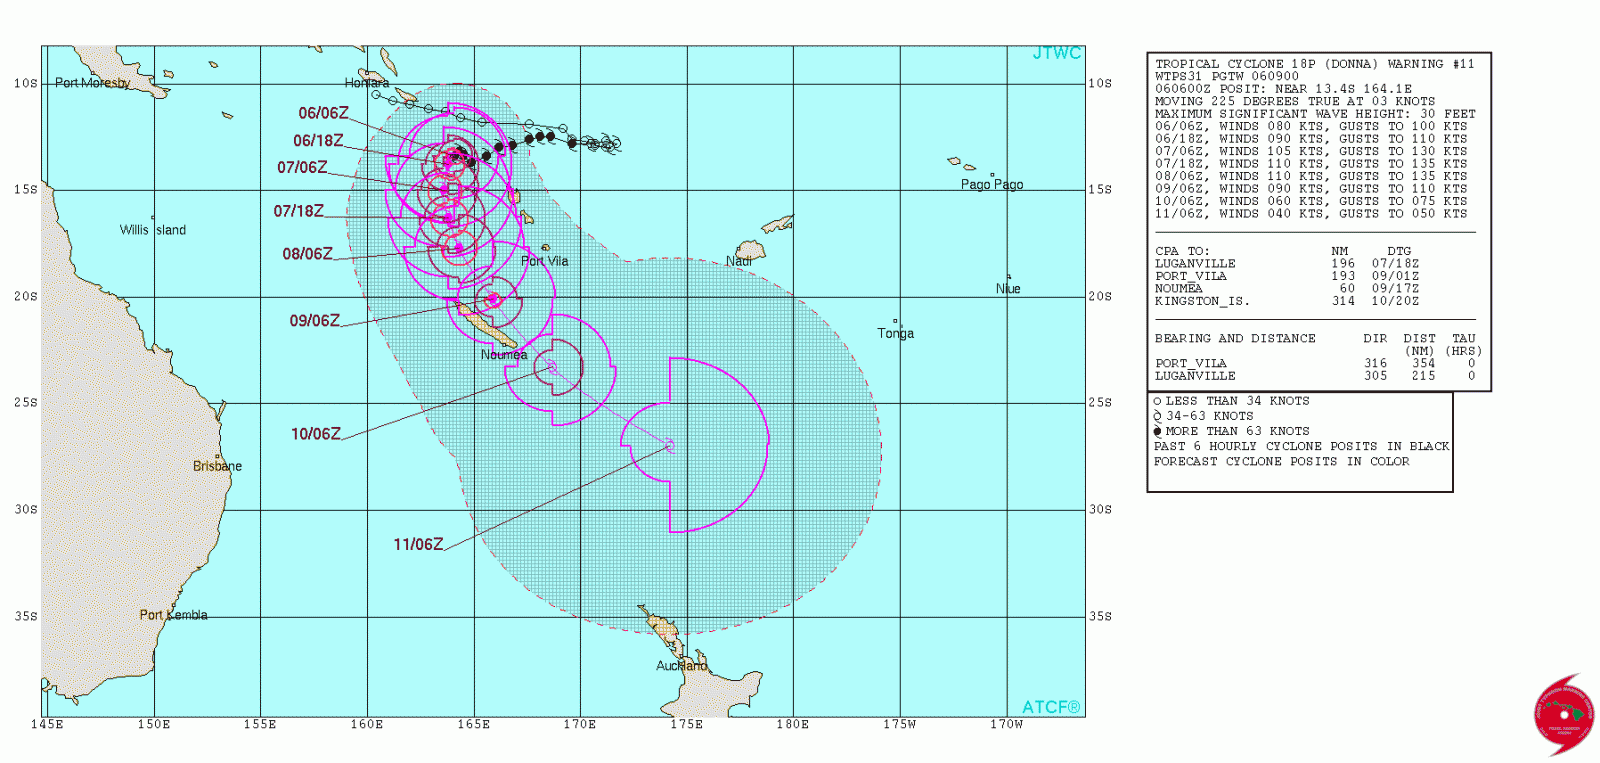 Tropical Cyclone Donna forecast track by JTWC at 09:00 UTC on May 6, 2017